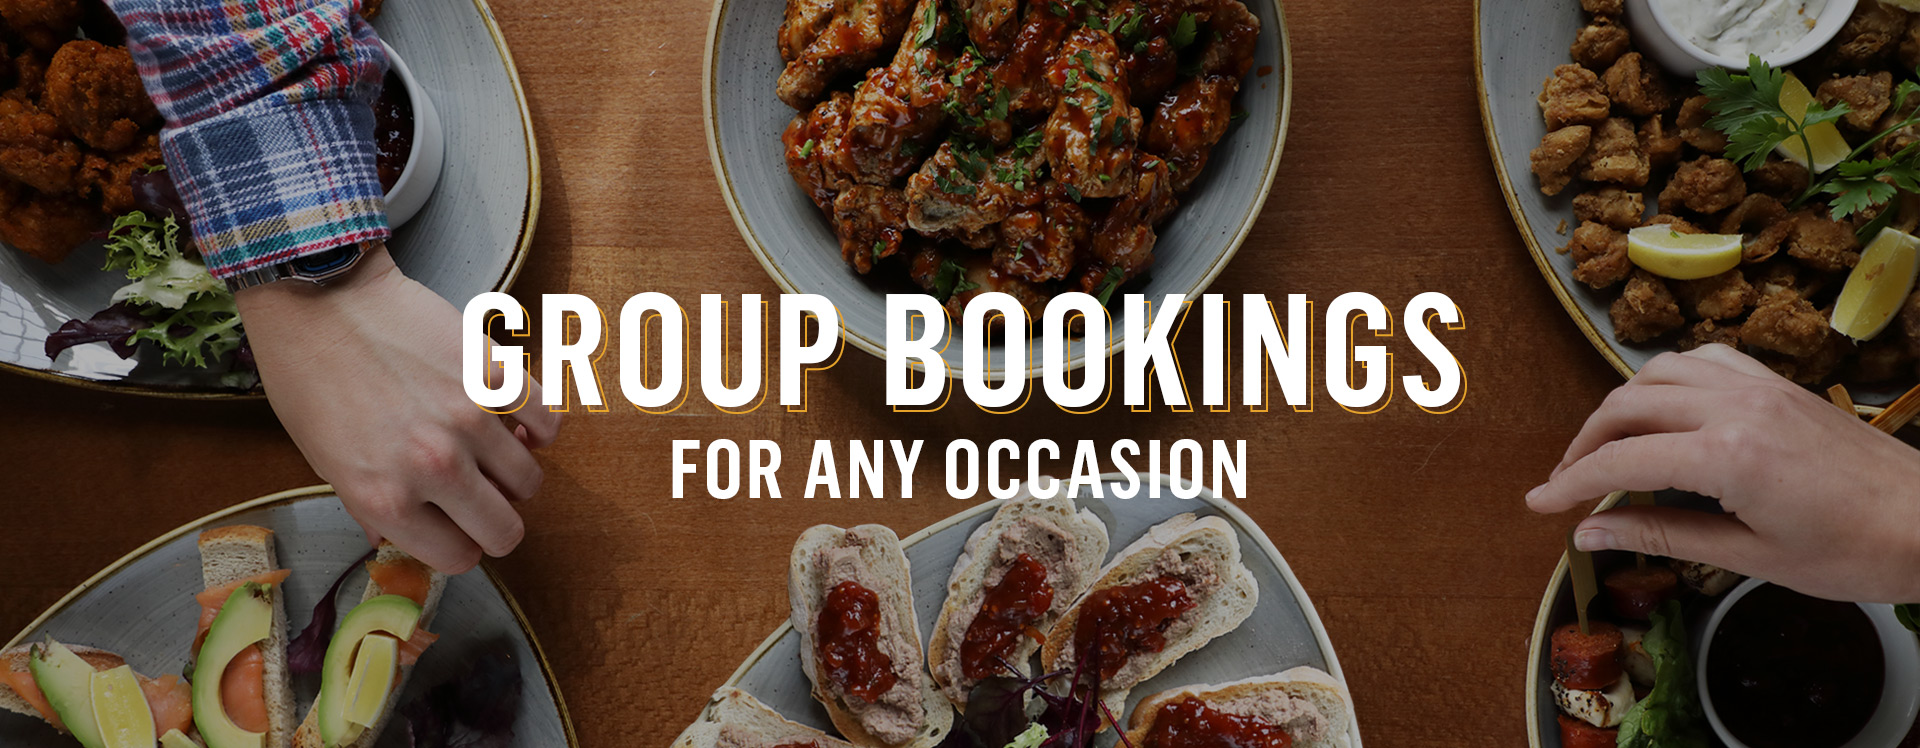 Group Bookings at The Ship